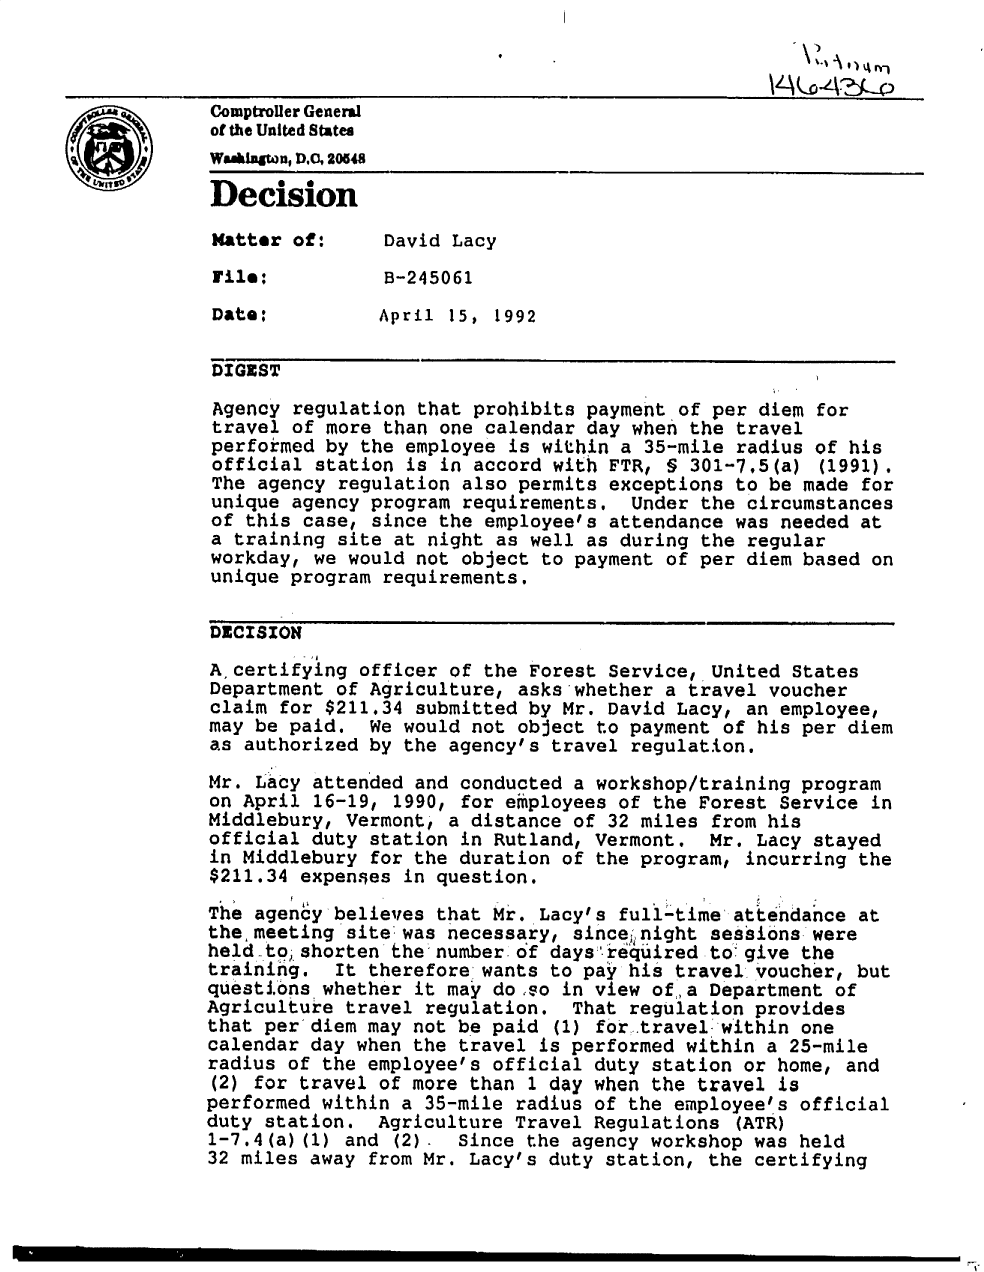 handle is hein.gao/gaobadoay0001 and id is 1 raw text is: 



LComptroller General
             of the United States
             WSWuw,A20548
             Decision

             Matter of:     David Lacy
             File:          B-245061

             Date:          April 15, 1992

             DIGEST

             Agency regulation that prohibits payment of per diem for
             travel of more than one calendar day when the travel
             performed by the employee is within a 35-mile radius of his
             official station is in accord with FTR, I§ 301-7,5(a) (1991)t
             The agency regulation also permits exceptions to be made for
             unique agency program requirements, Under the circumstances
             of this case, since the employee's attendance was needed at
             a training site at night as well as during the regular
             workday, we would not object to payment of per diem based on
             unique program requirements,

             DECISION
             A, certifying officer of the Forest Service, United States
             Department of Agriculture, asks whether a travel voucher
             claim for $211.34 submitted by Mr. David Lacy, an employee,
             may be paid. We would not object to payment of his per diem
             as authorized by the agency's travel regulation.
             Mr. Lacy attended and conducted a workshop/training program
             on April 16-19, 1990, for employees of the Forest Service in
             Middlebury, Vermont, a distance of 32 miles from his
             official duty station in Rutland, Vermont.  Mr. Lacy stayed
             in Middlebury for the duration of the program, incurring the
             $211.34 expenses in question.
             The agency believes that Mr. Lacy's full-time attendance at
             the meeting site: was necessary, sinceinight sessions- were
             held-to; shorten the numberof days'd equired to: give the
             training.  It therefore wants to pay his travel voucher, but
             questions whether it may do so in view of a Department of
             Agriculture travel regulation. That regulation provides
             that per diem may not be paid (1) for travel within one
             calendar day when the travel is performed within a 25-mile
             radius of the employee's official duty station or home, and
             (2) for travel of more than 1 day when the travel is
             performed within a 35-mile radius of the employee's official
             duty station. Agriculture Travel Regulations (ATh)
             1-7.4(a) (1) and (2). Since the agency workshop was held
             32 miles away from Mr. Lacy's duty station, the certifying


